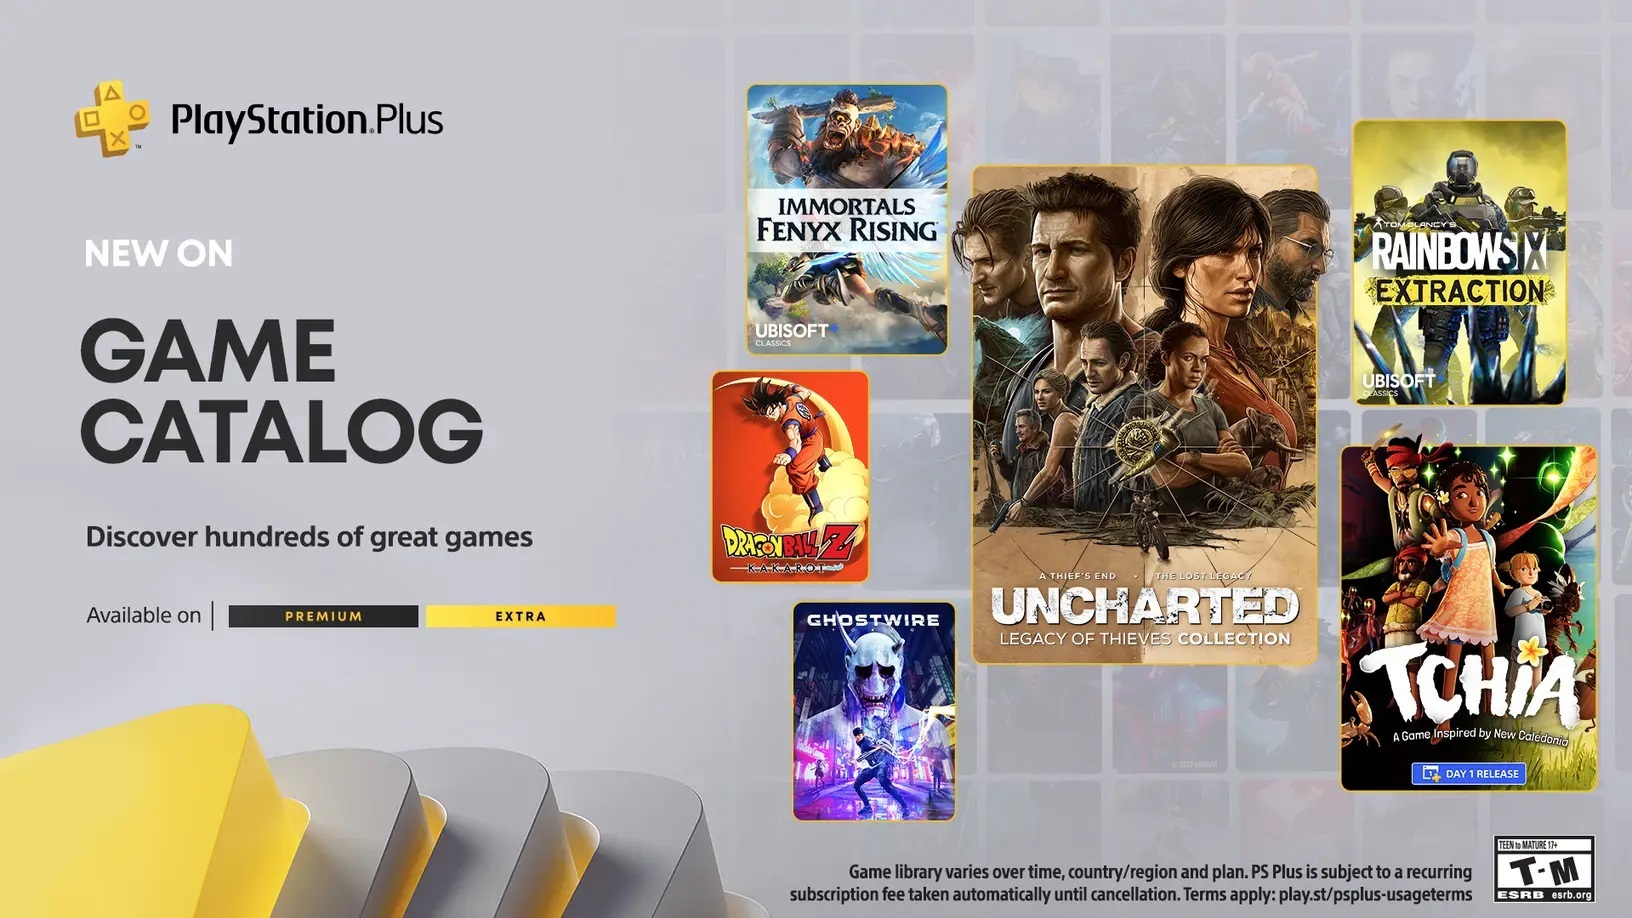 Uncharted, Street Fighter V, Life is Strange 2 and Untitled Goose Game among others on PlayStation Plus